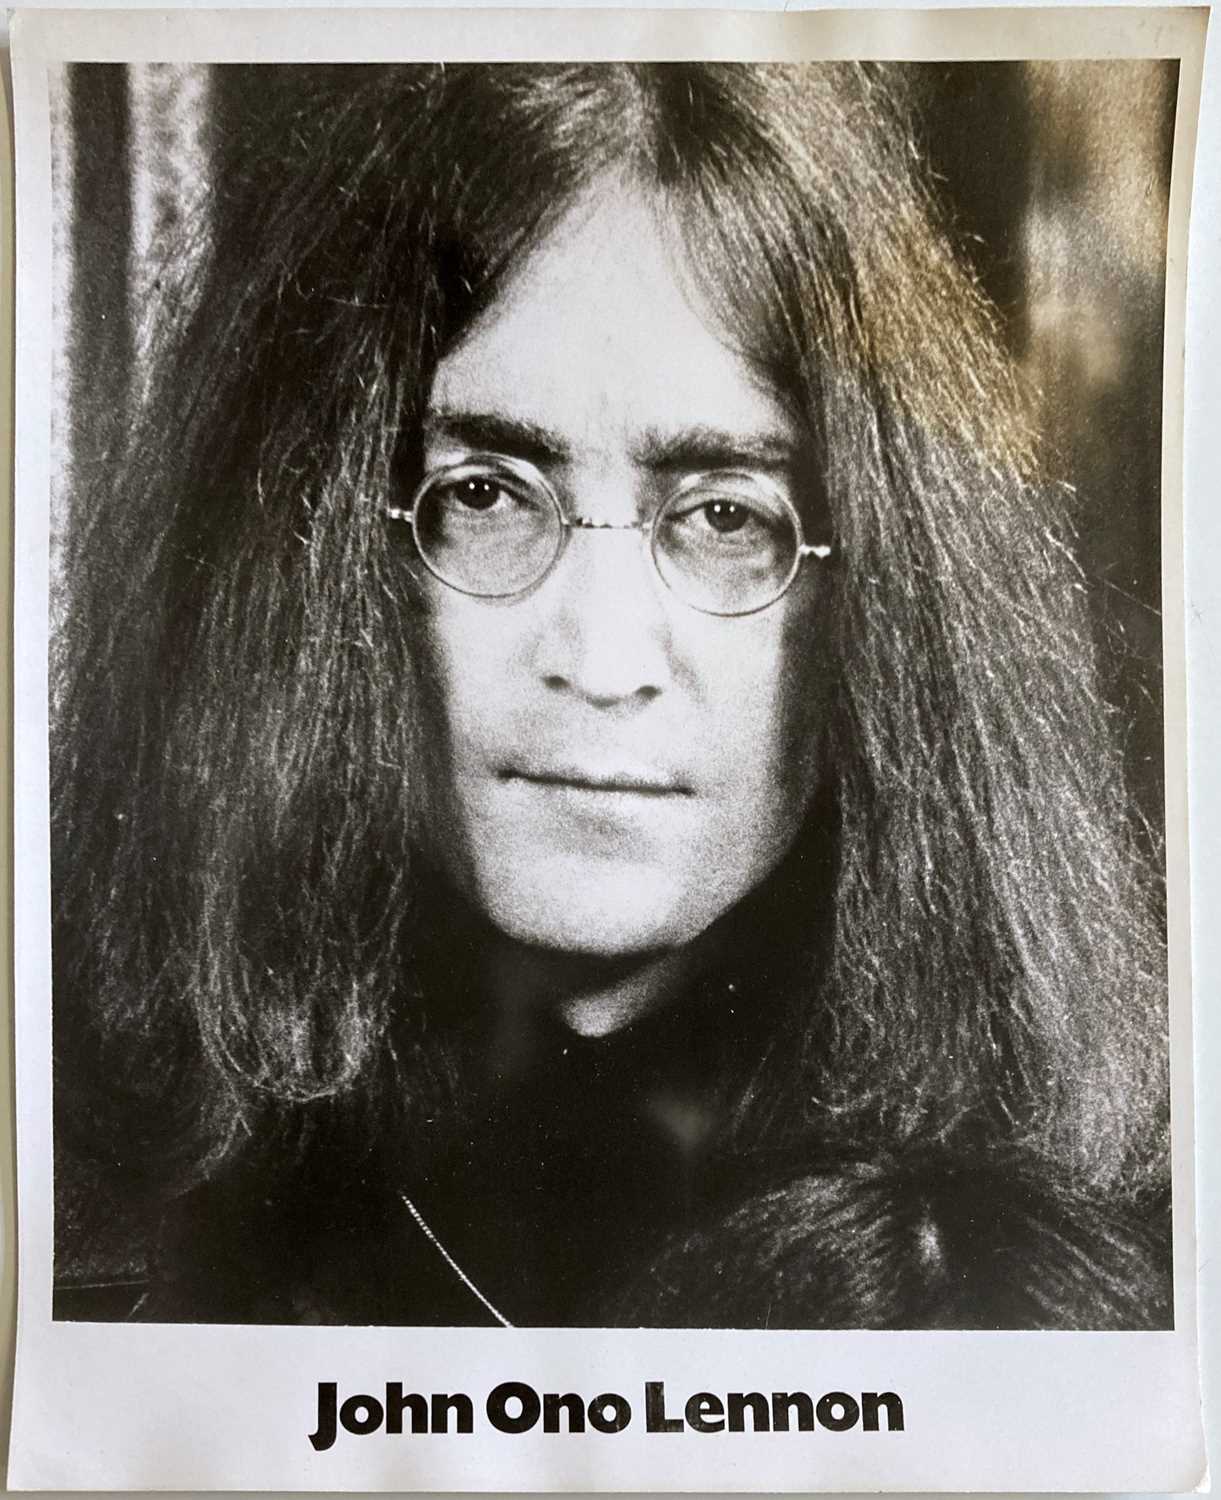 THE JOHN LENNON LOST INTERVIEWS FROM 1969/70 CONDUCTED BY KEN ZEILIG - Image 28 of 33